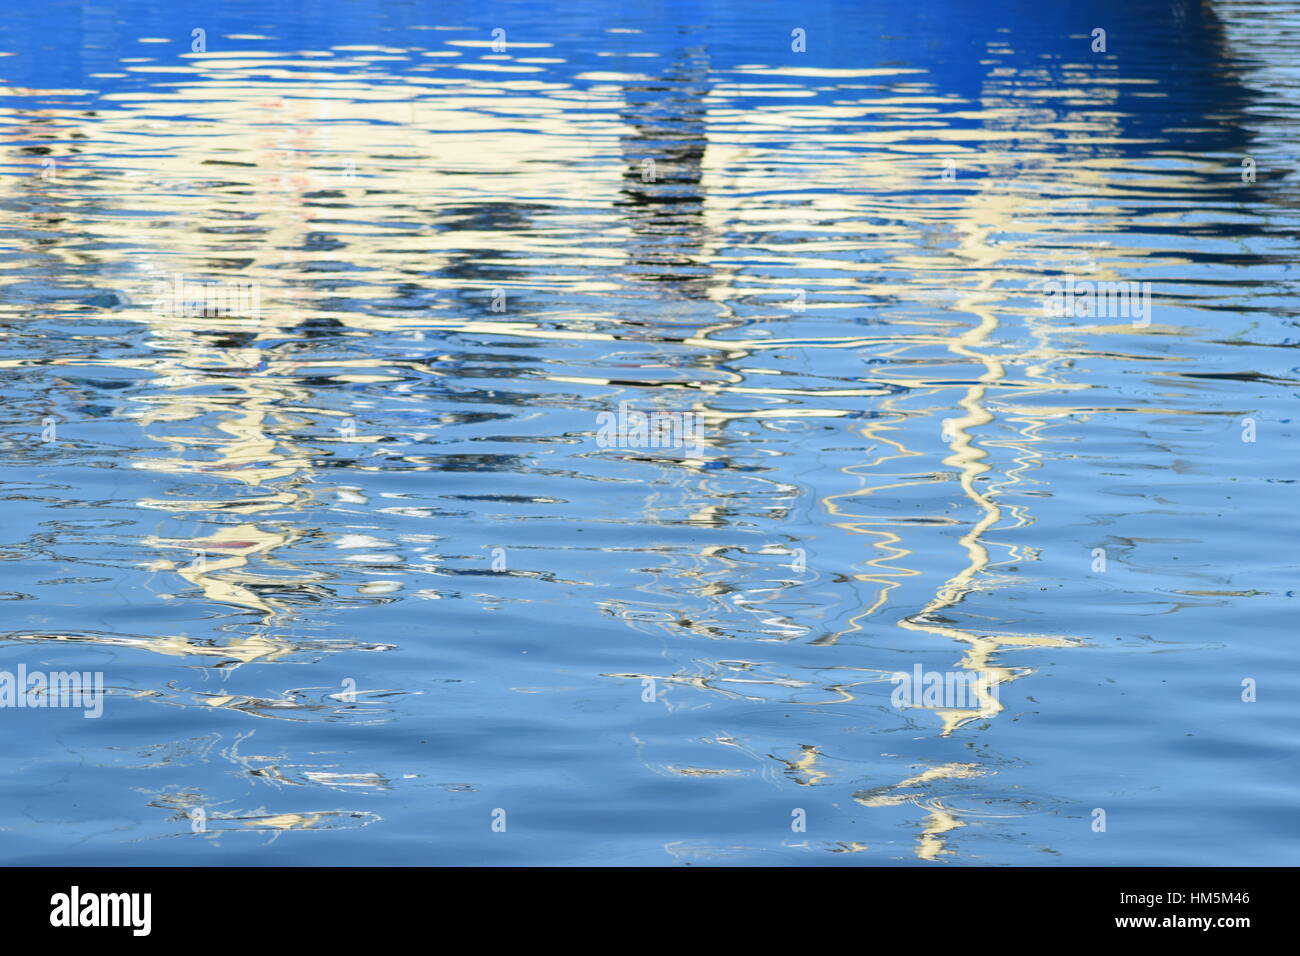 Reflection of fishing boat in the water Stock Photo